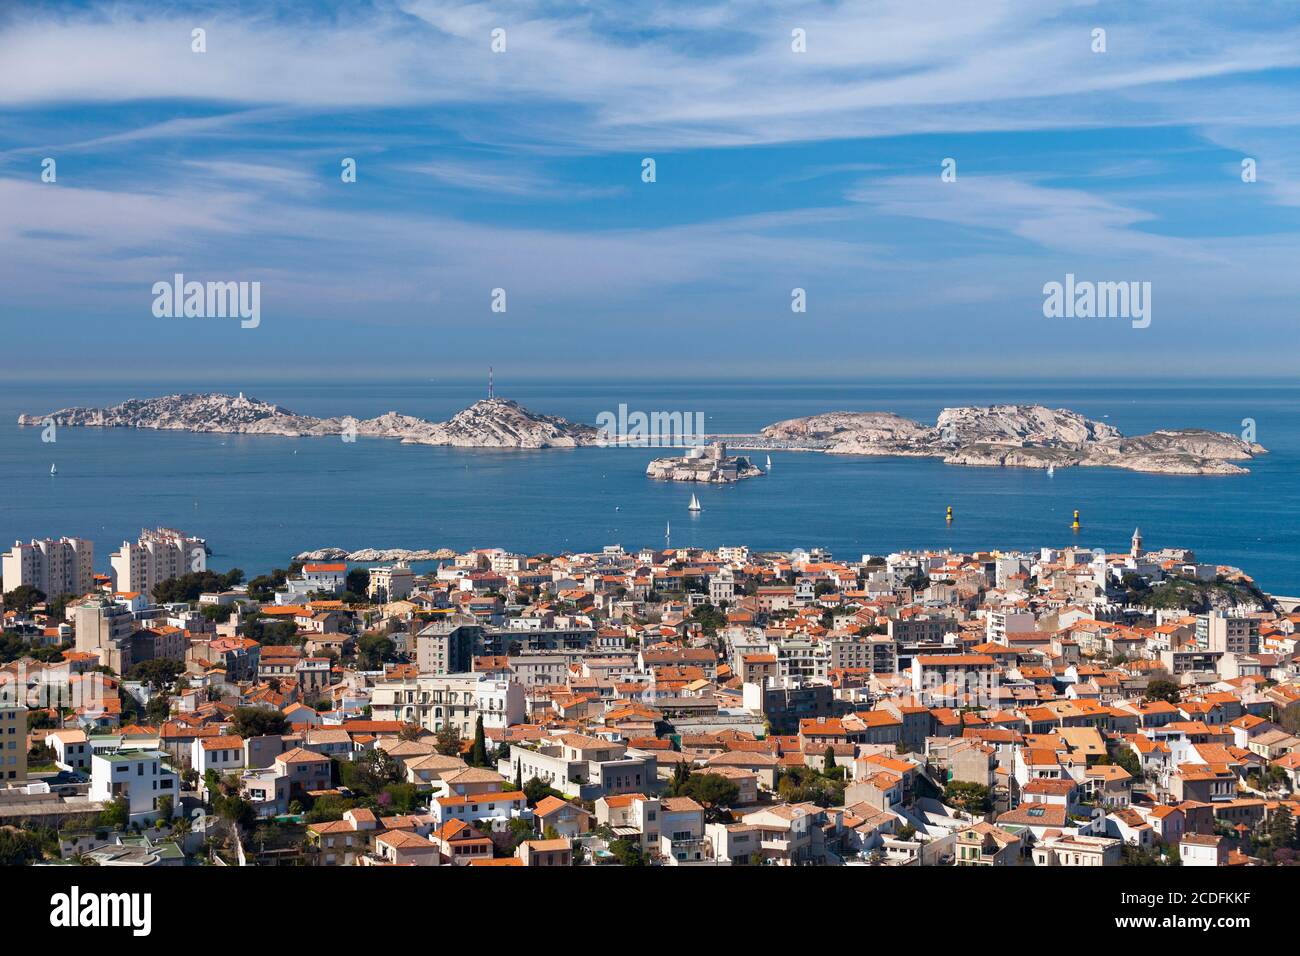 Aerial view of the district of 'Le Pharo' with off the coast of Marseille, a small archipelago called 'Les Îles' (The Islands in English). Stock Photo